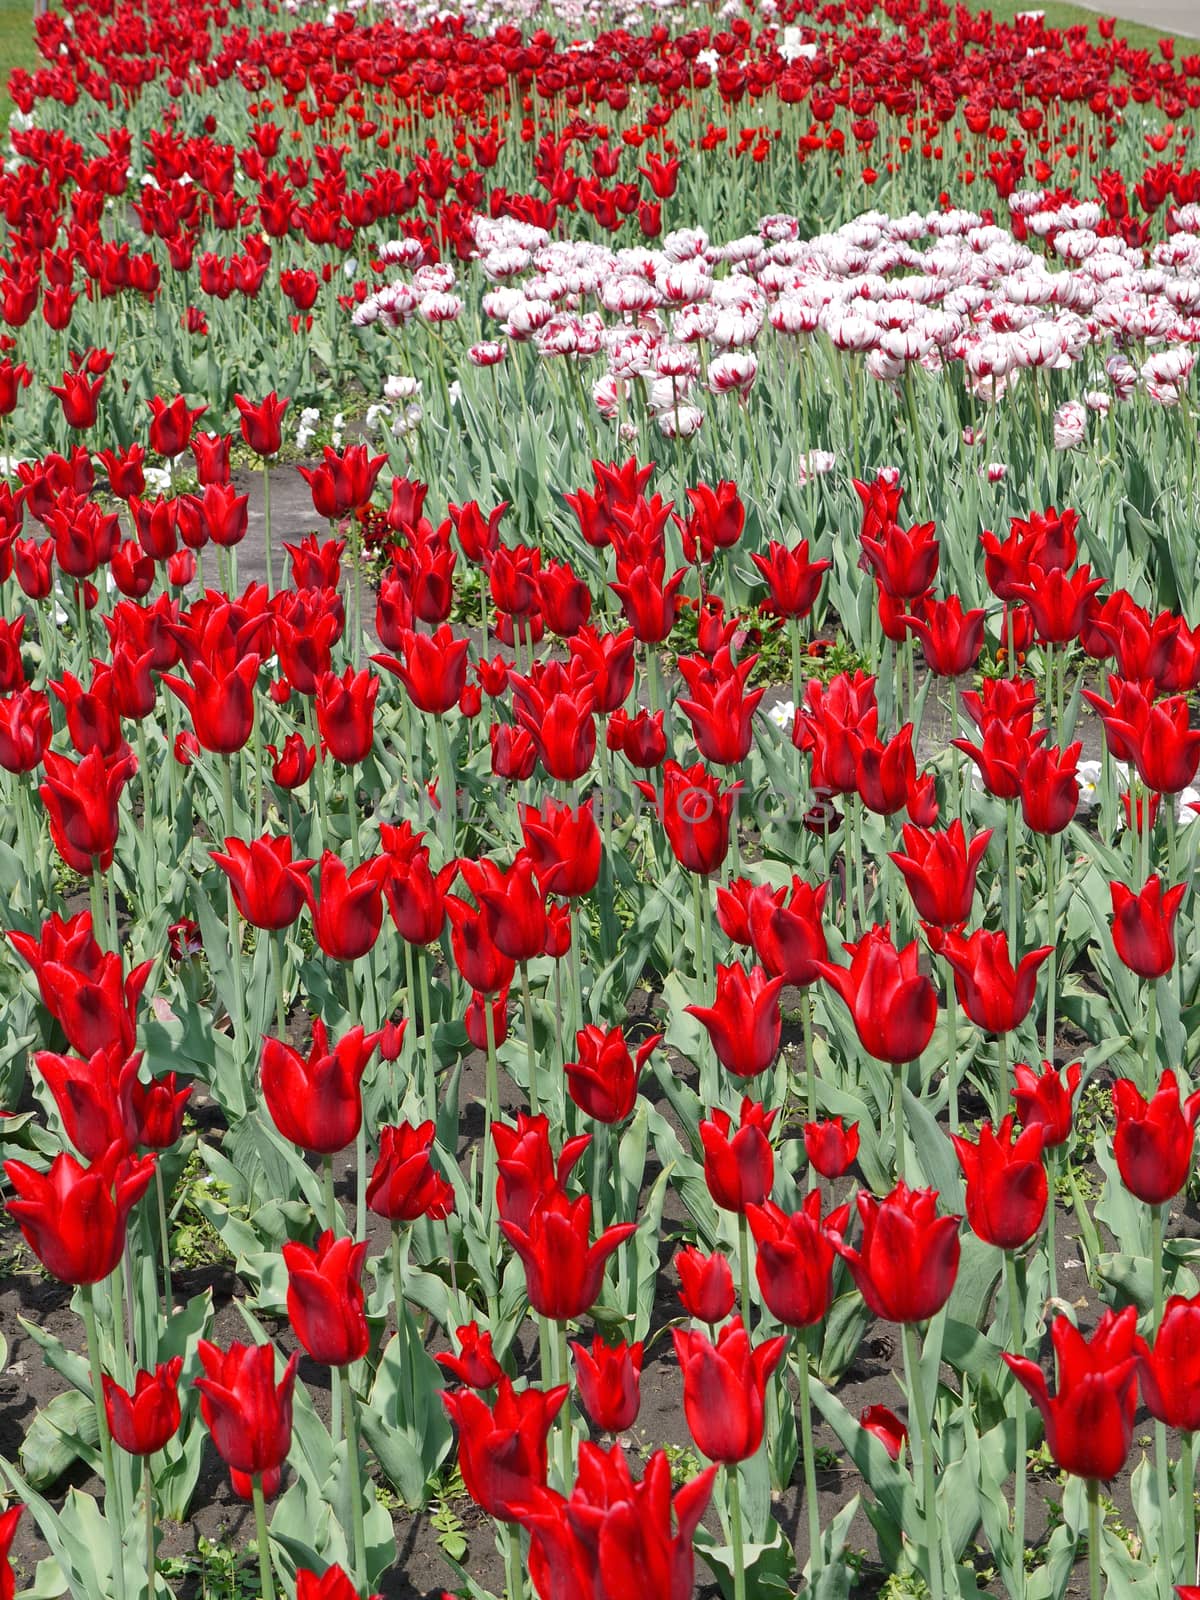 boundless field of red and white tulips by Adamchuk